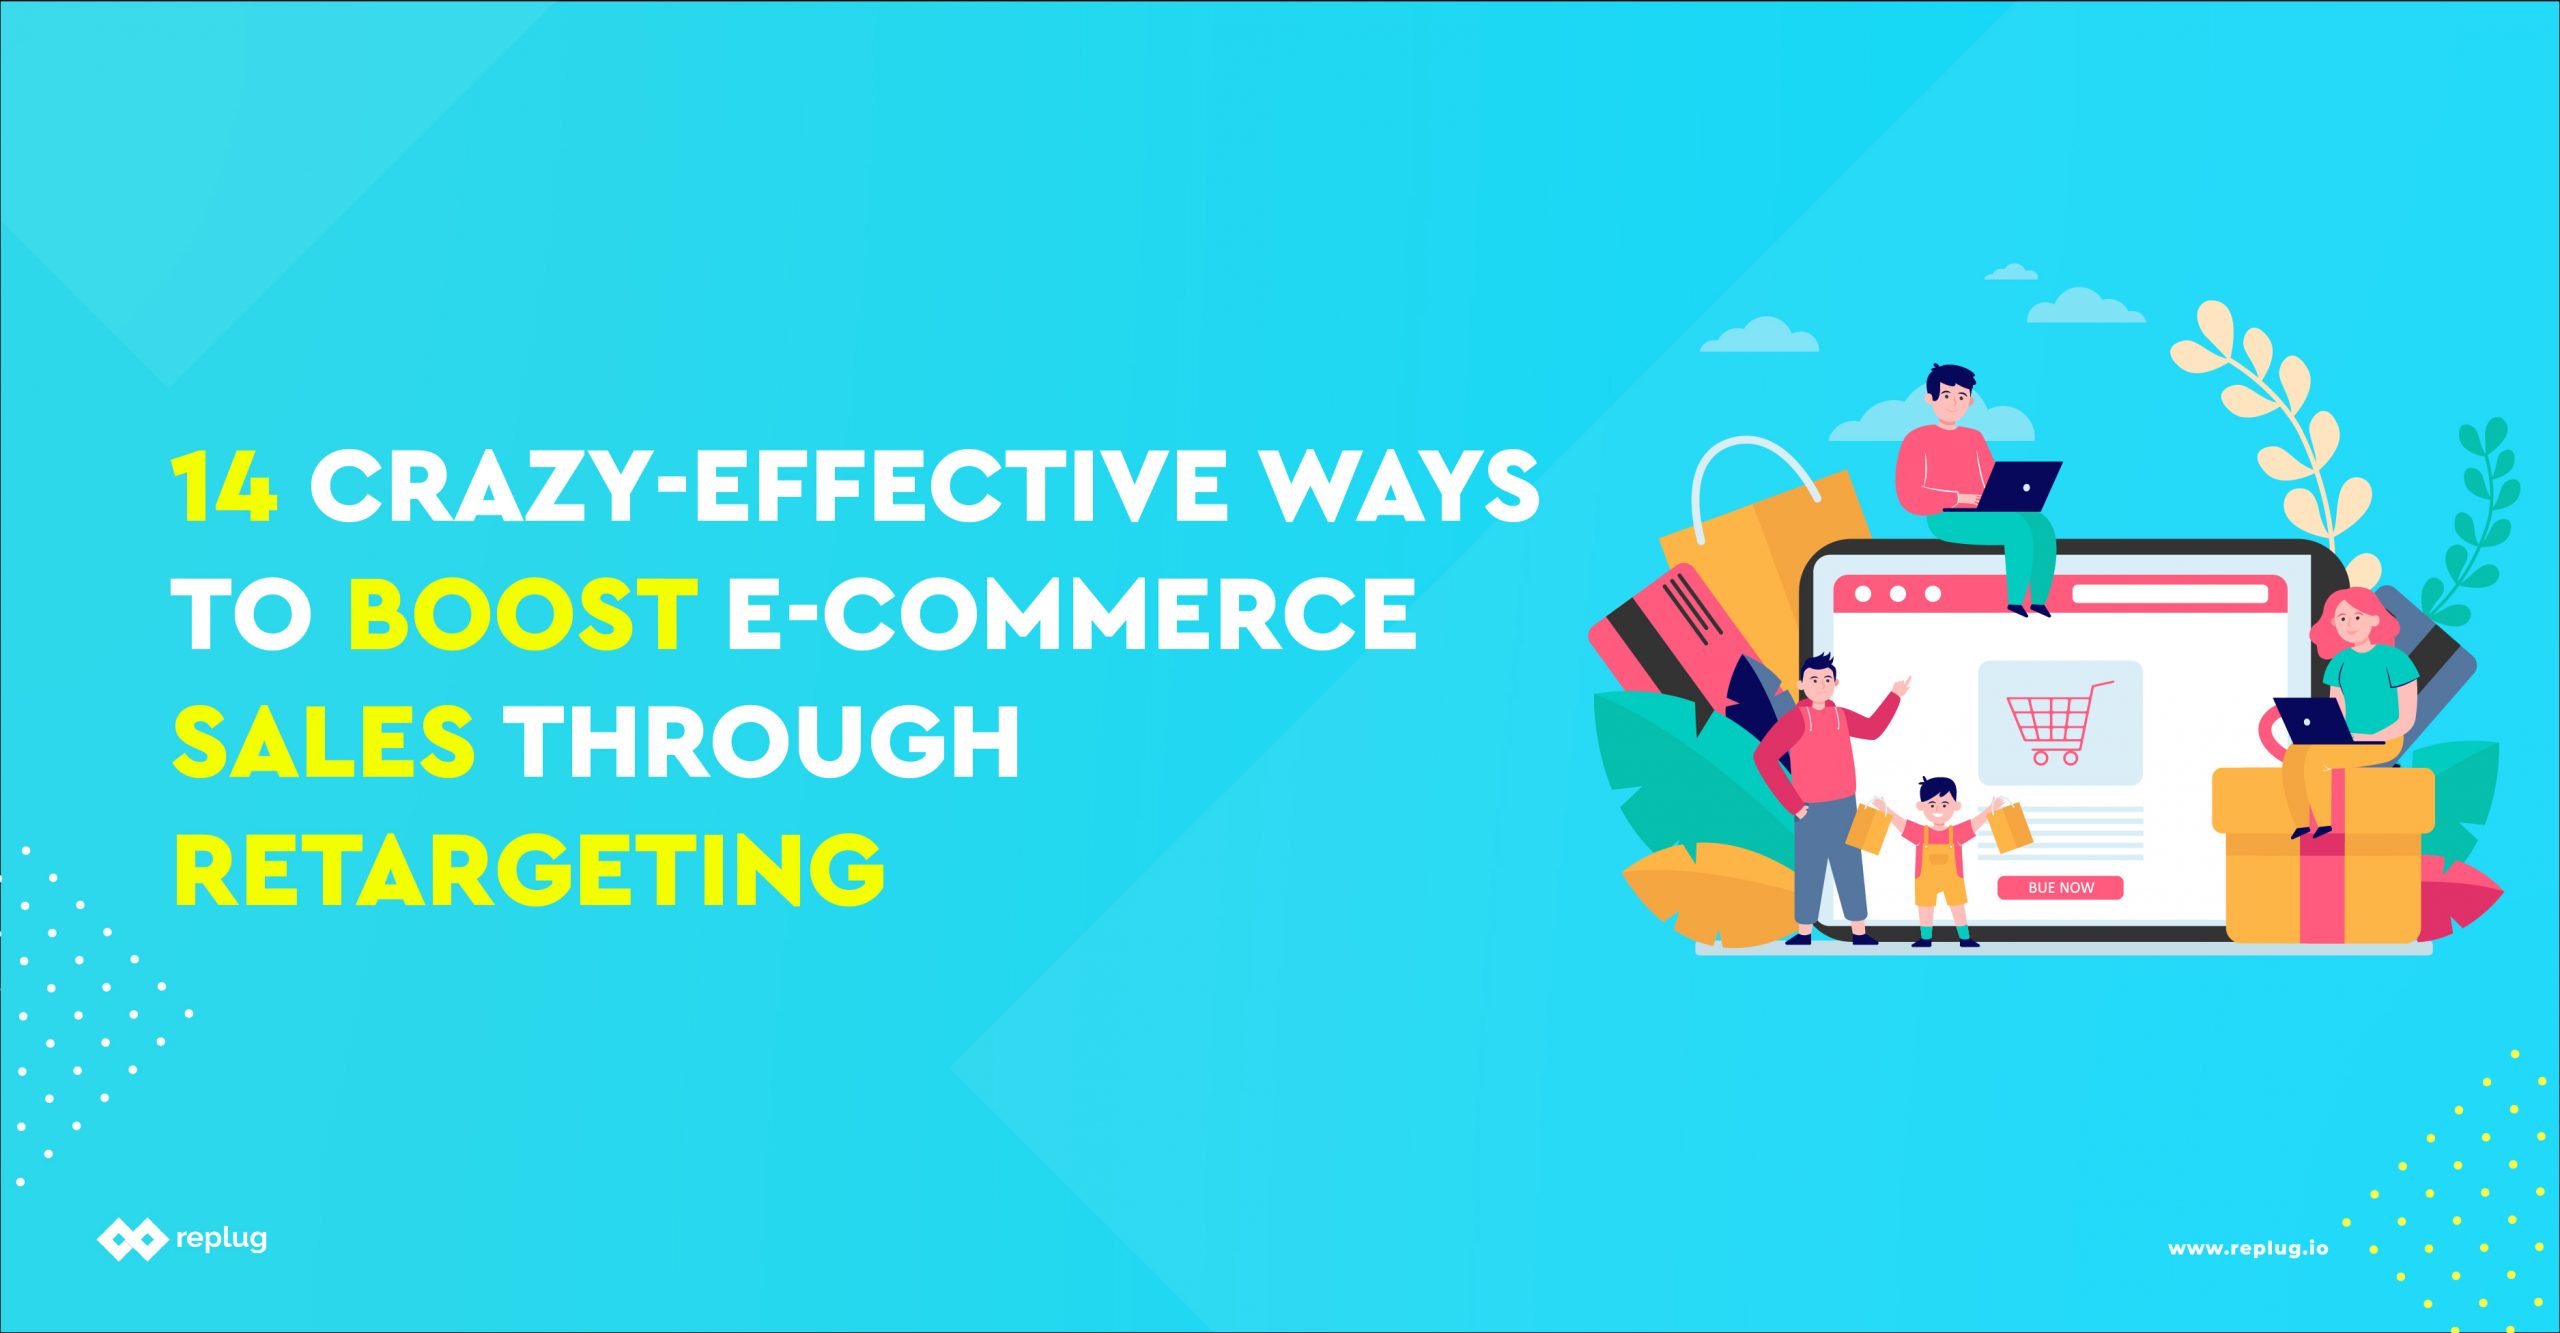 14 Crazy-Effective Ways to Boost E-commerce Sales Through Retargeting